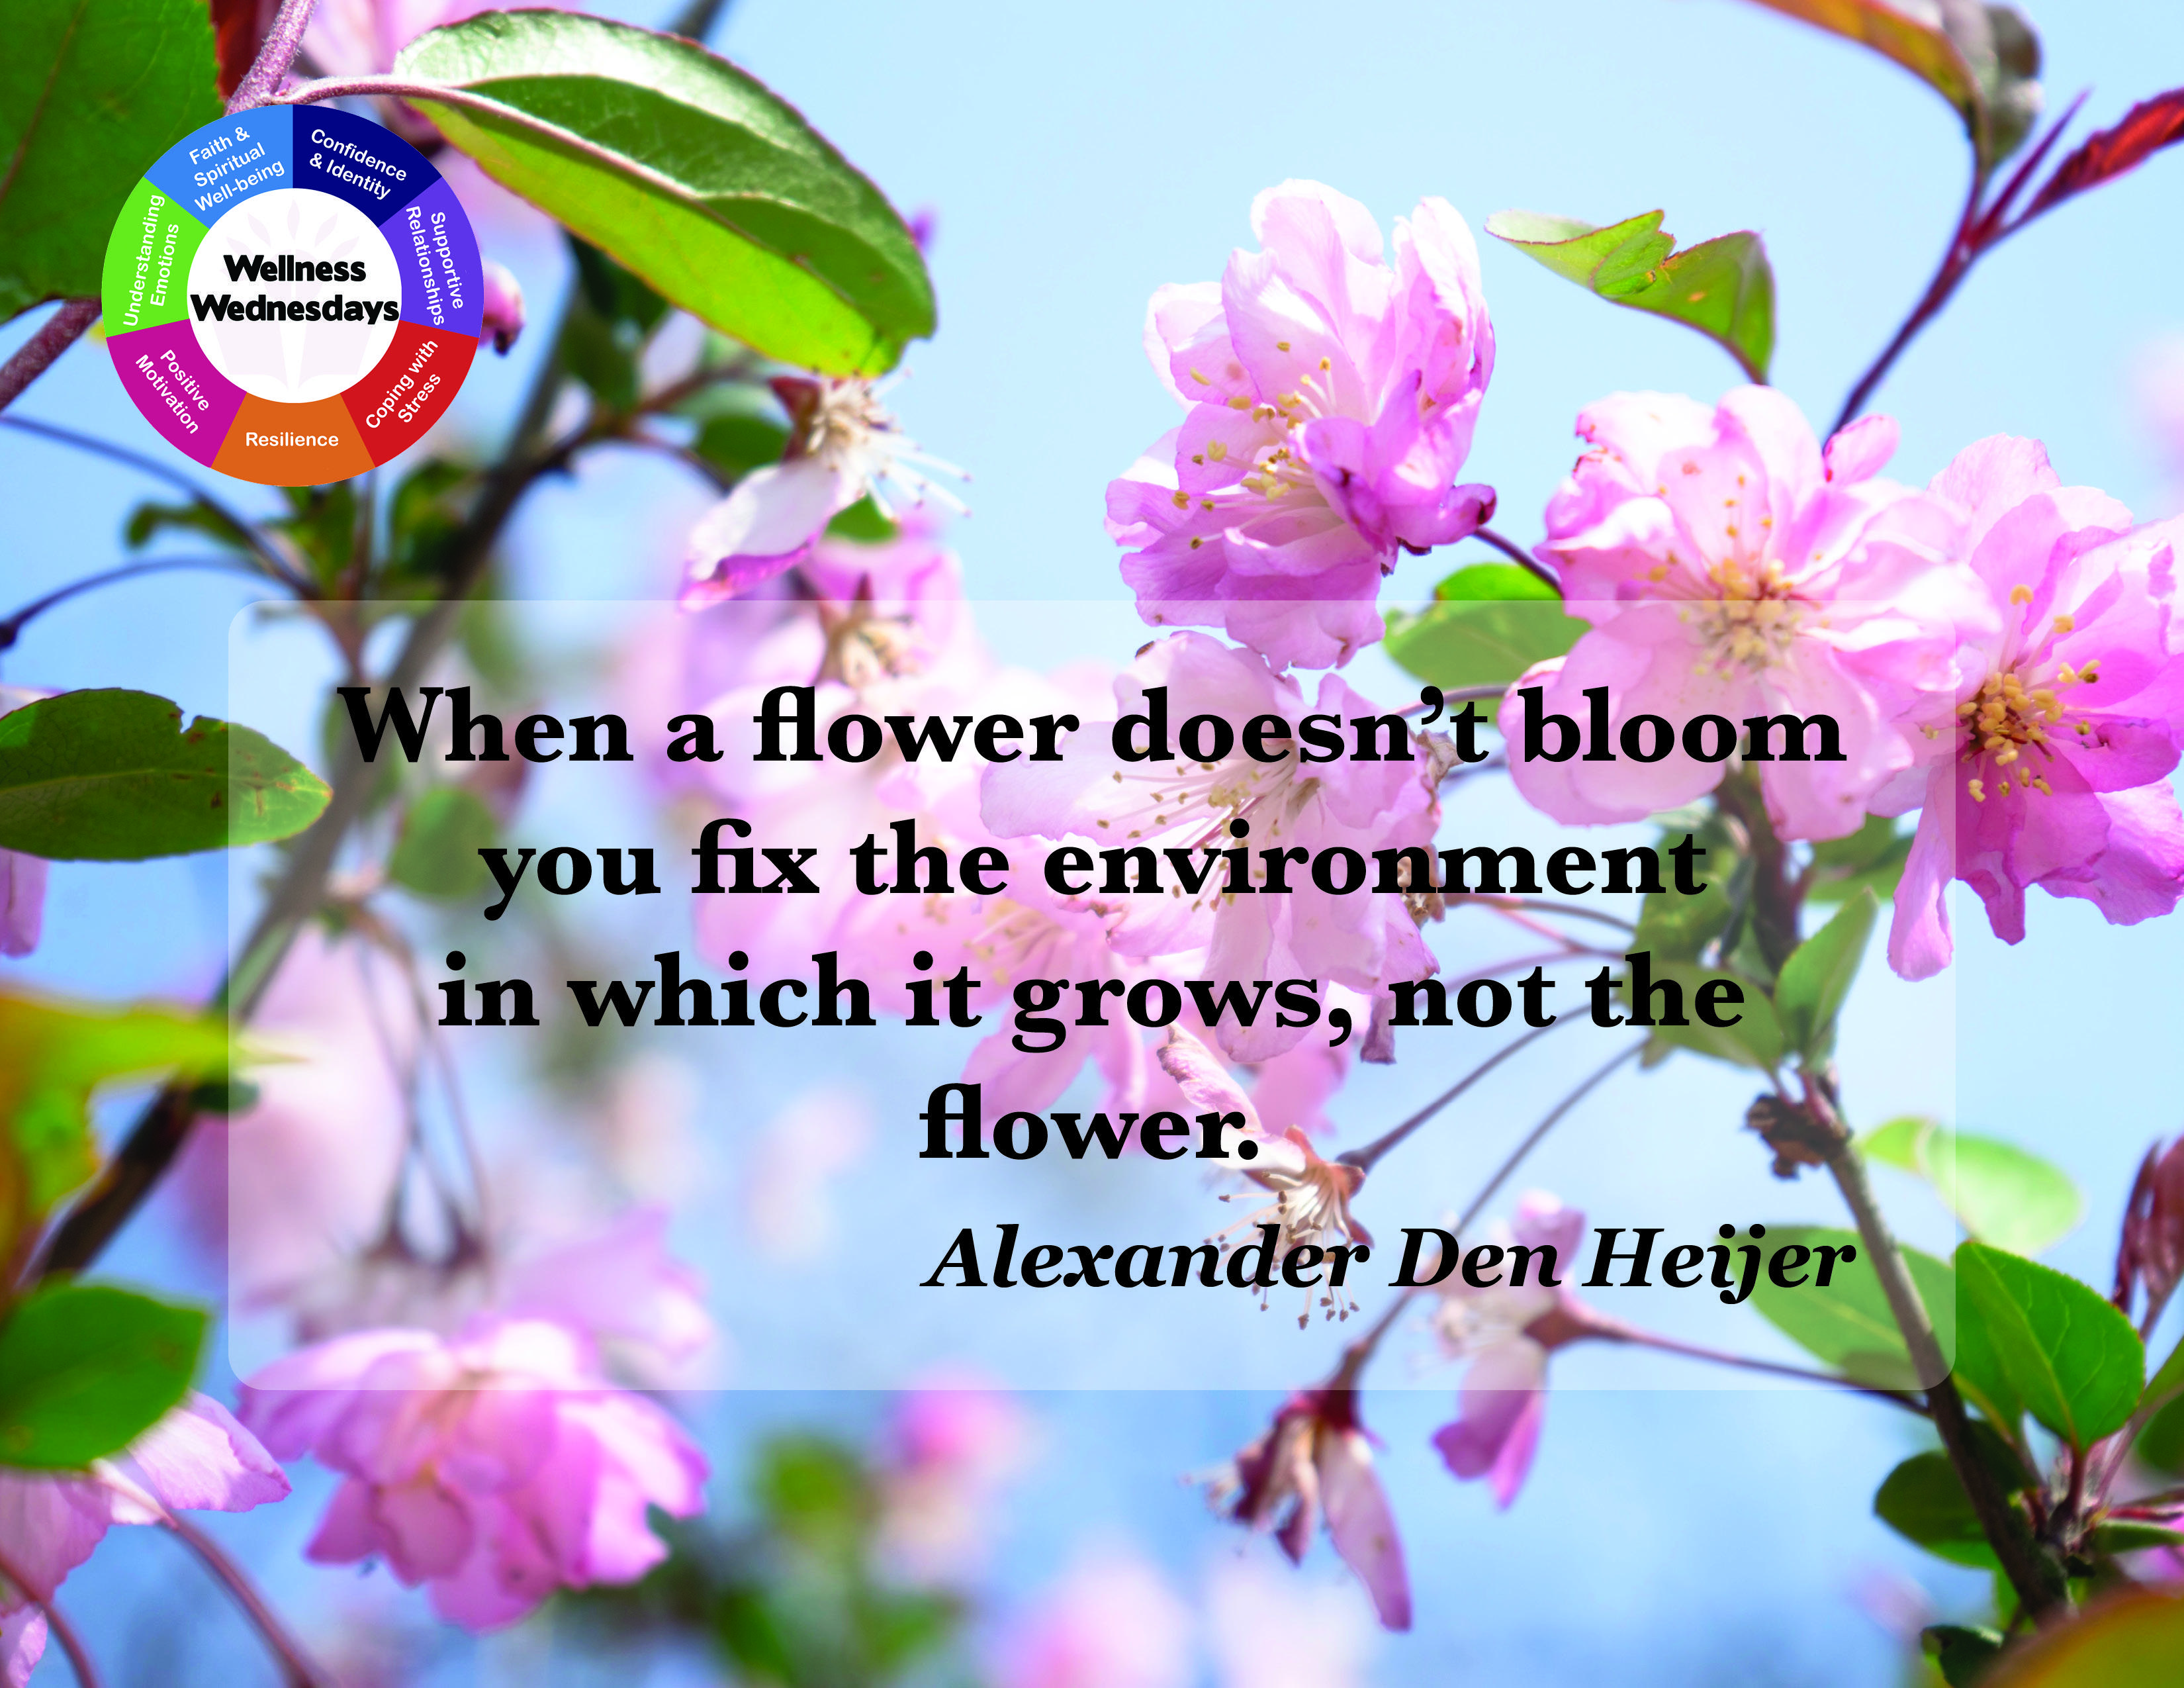 “When a flower doesn't bloom, you fix the environment in which it grows, not the flower.” (Alexander Den Heijer)